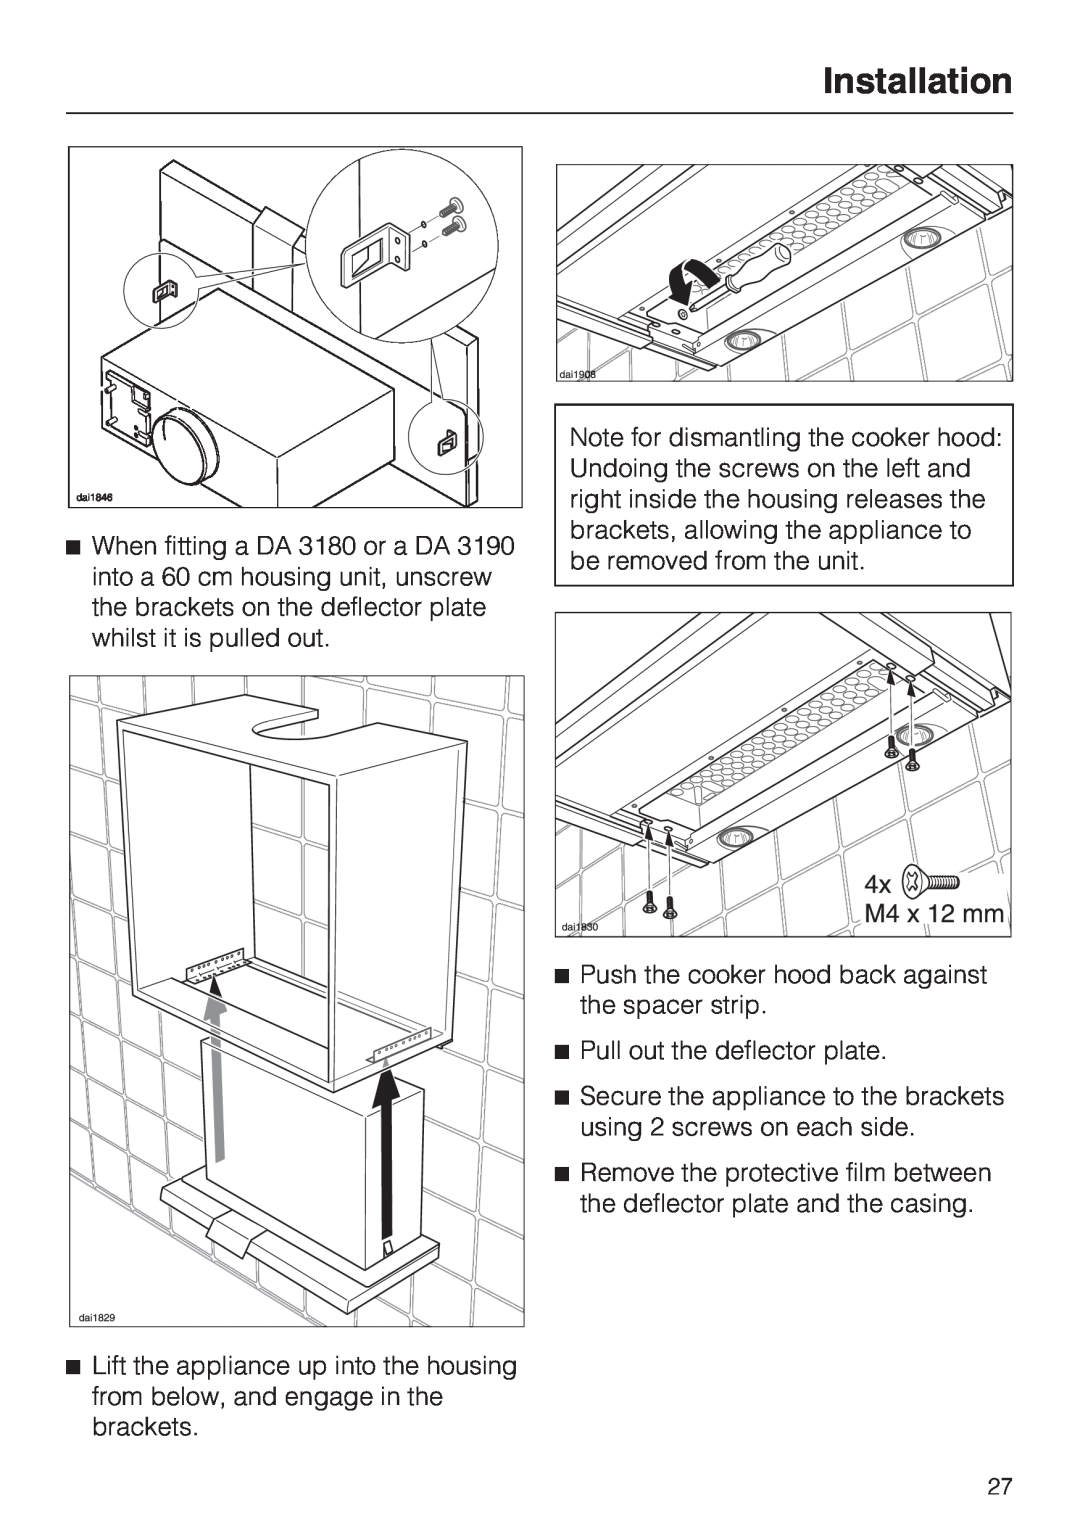 Miele DA 3160 EXT, DA 3190 EXT installation instructions Installation, Pull out the deflector plate 